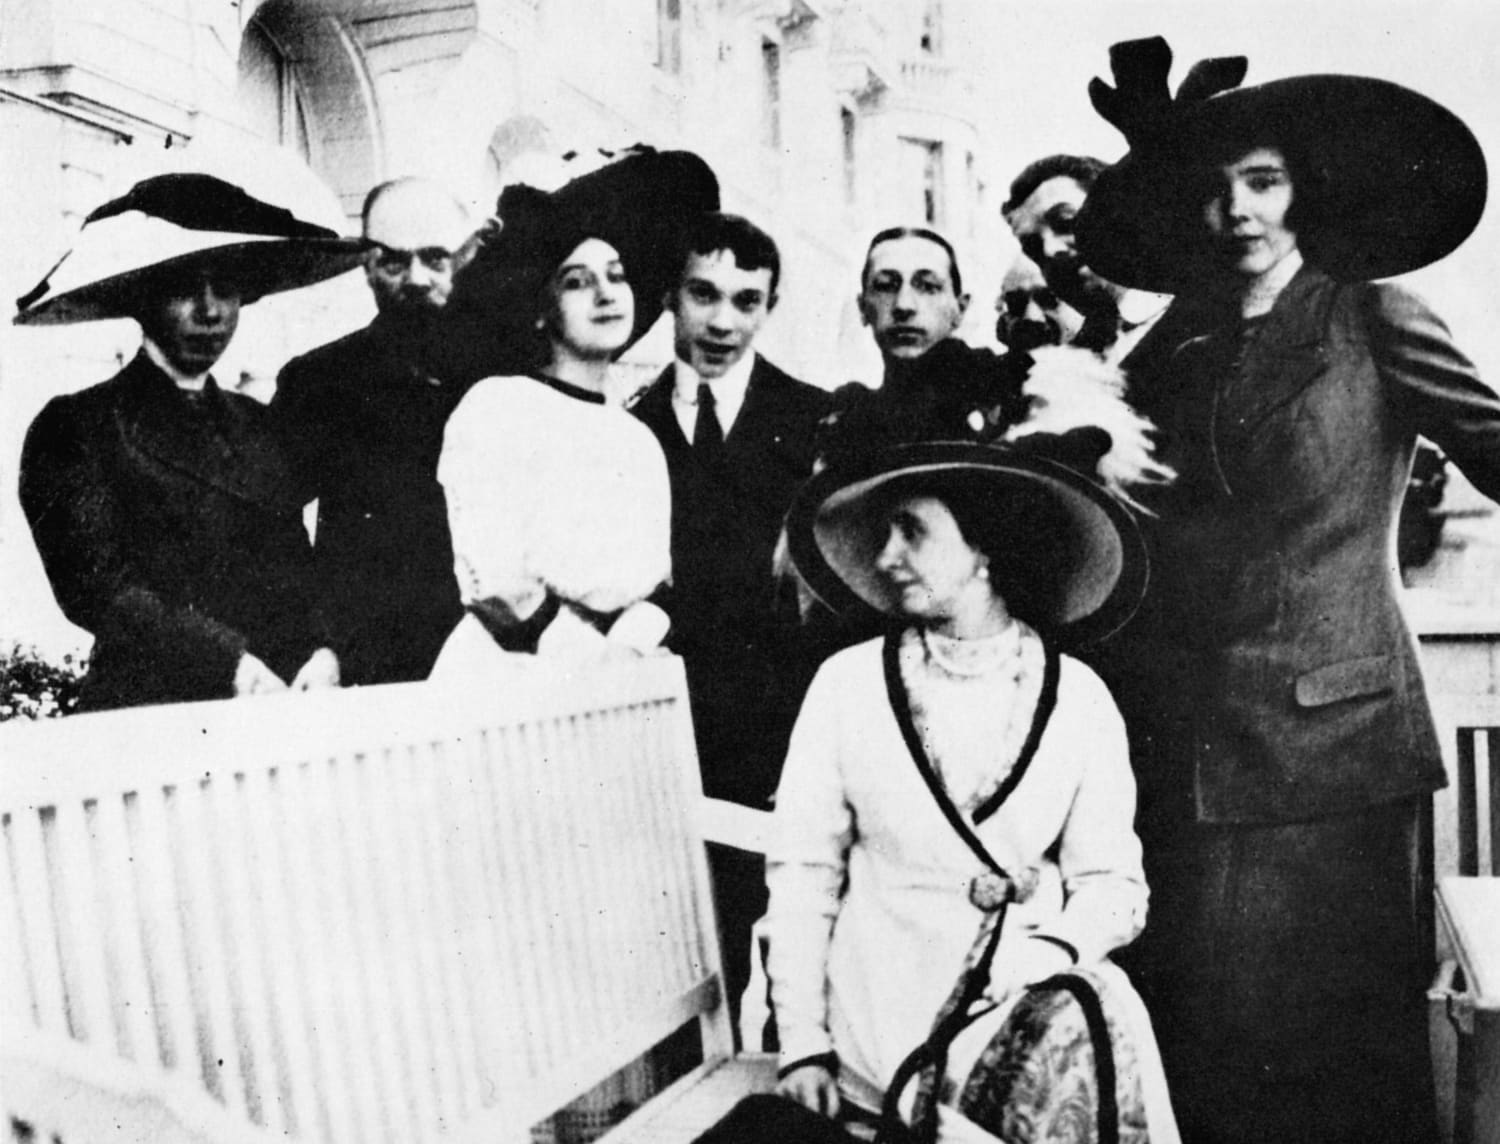 Stravinsky, Diaghilev, Nijinsky, Karsavina, and other patrons of the legendary Ballets Russes in Monte Carlo. 1912.